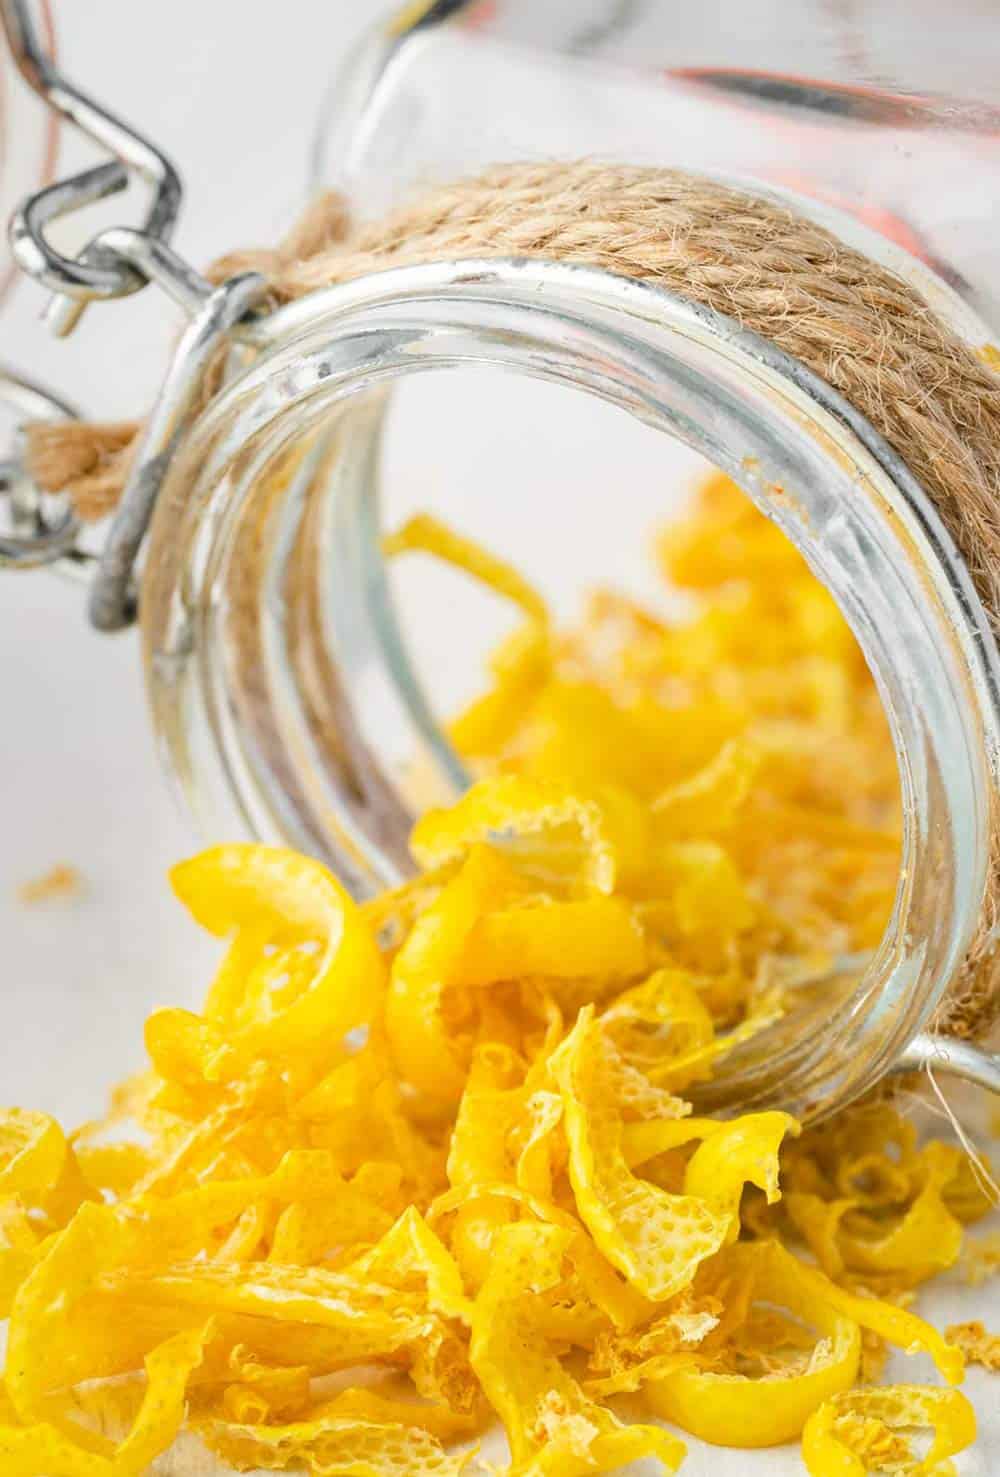 An image of a jar of dried lemon peel that has been tipped over, with some of the dried lemon zest spilled out onto a white surface.